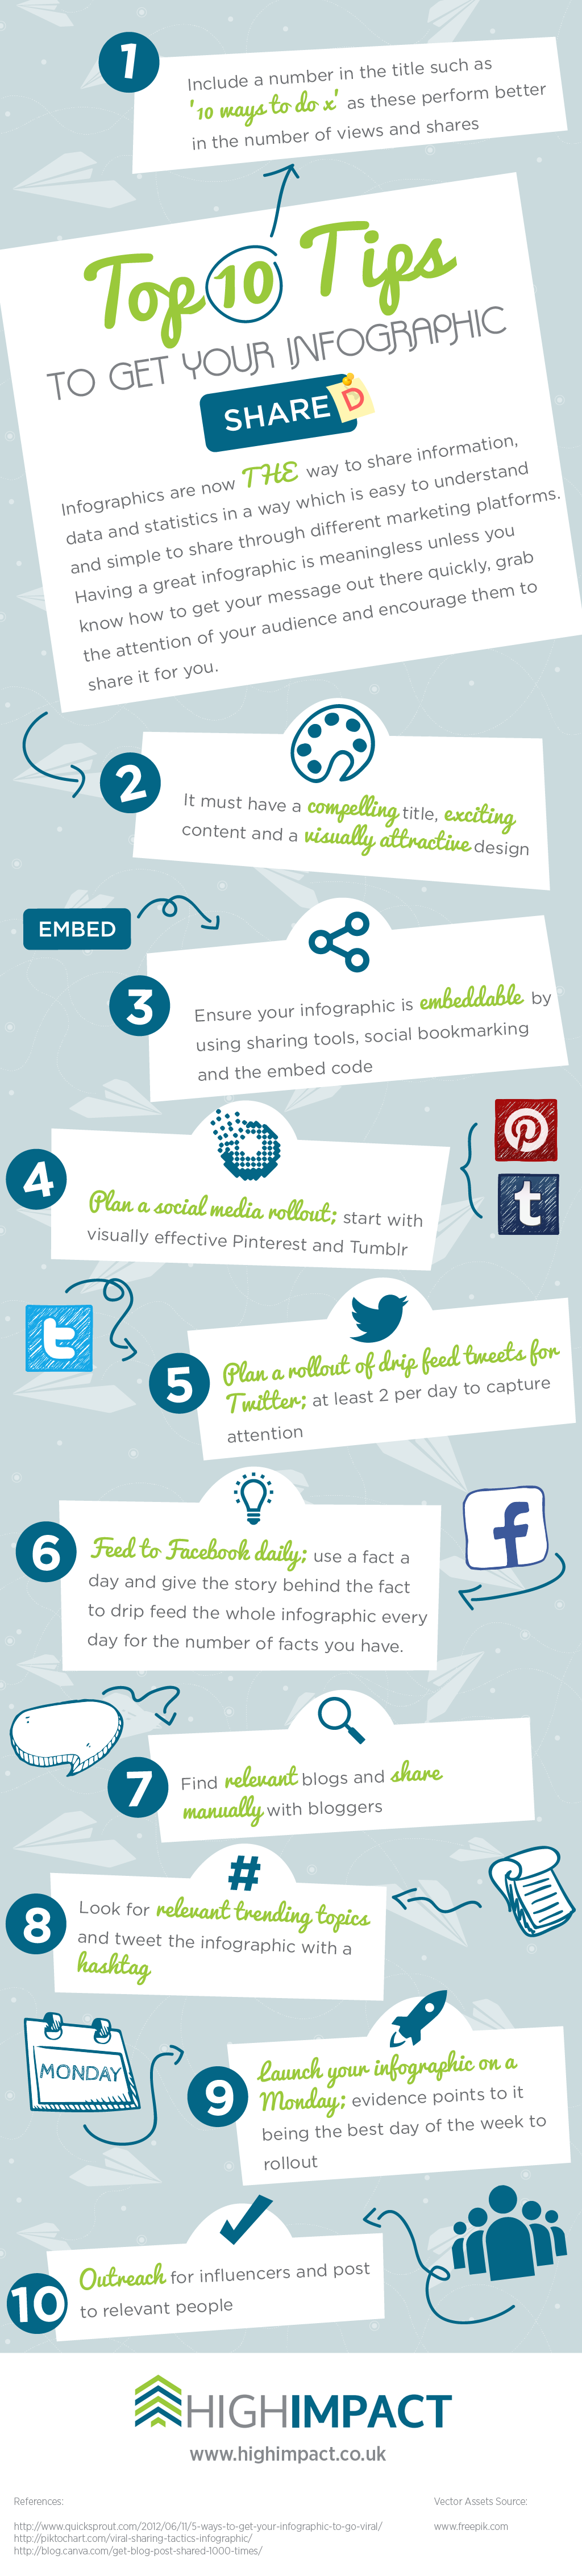 10 tips to get your infographic shared